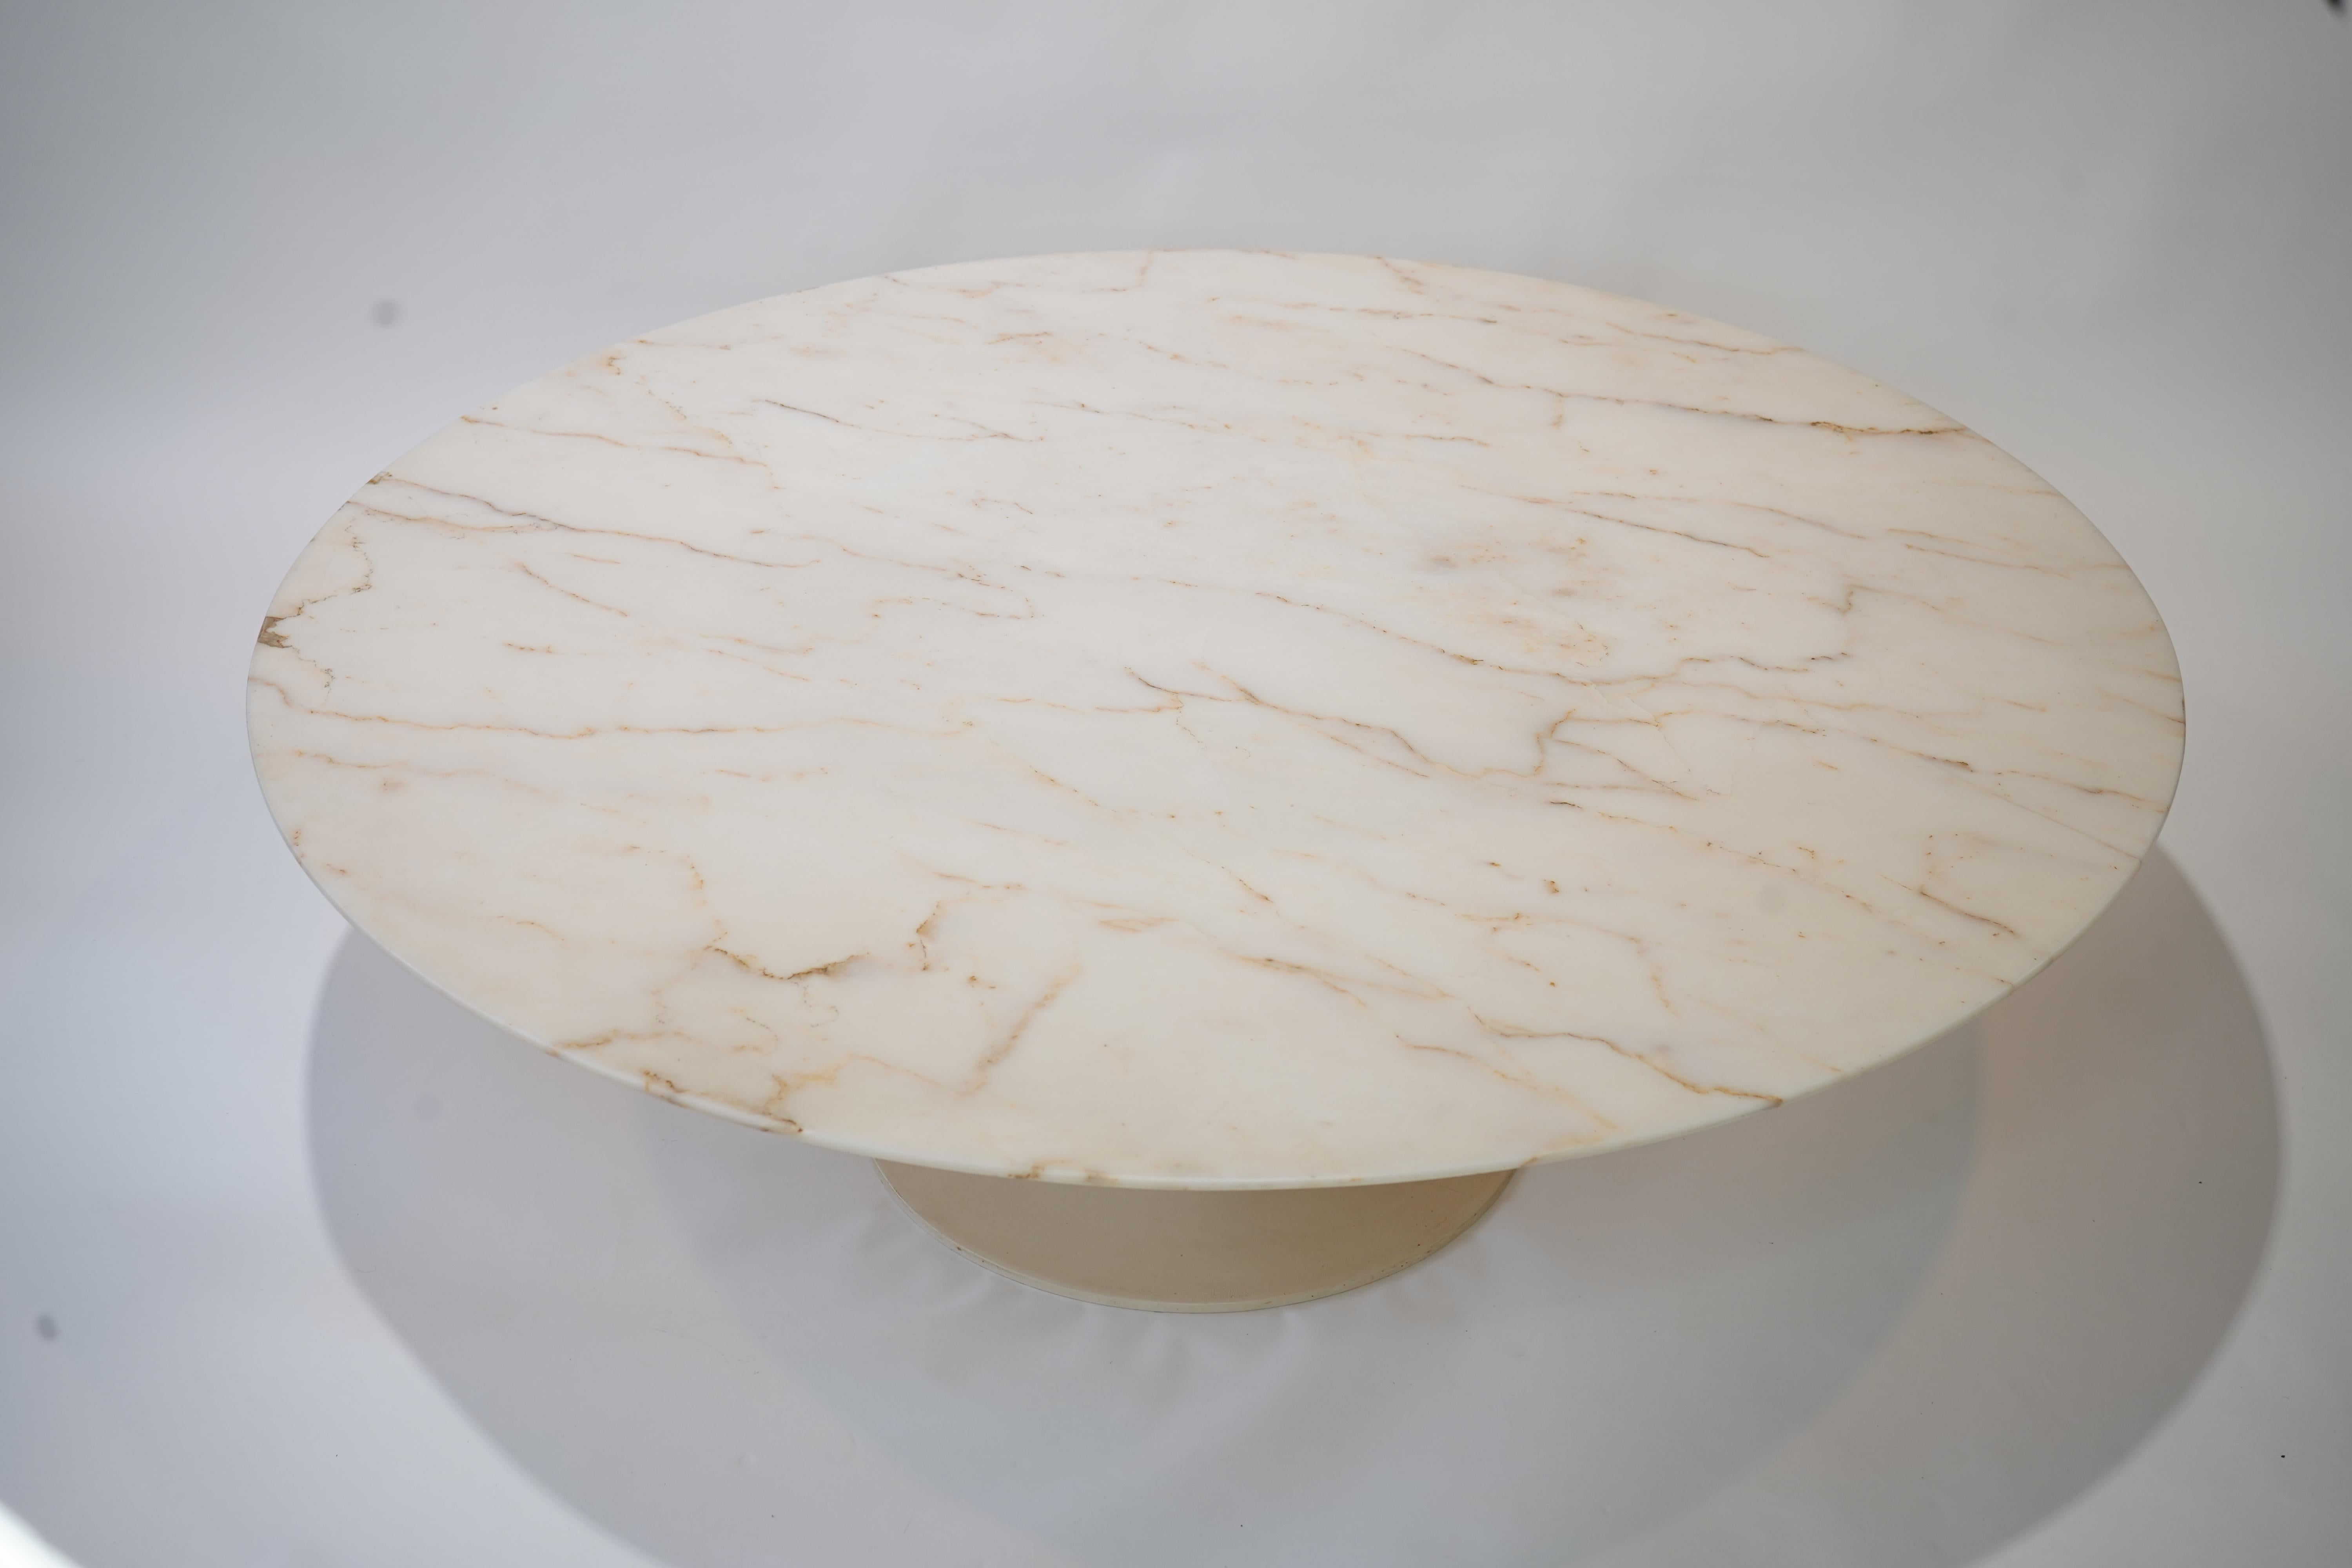 Vintage Eero Saarinen marble top coffee table for Knoll. This is a beautiful early example from the 1960's featuring a thin translucent 47.25